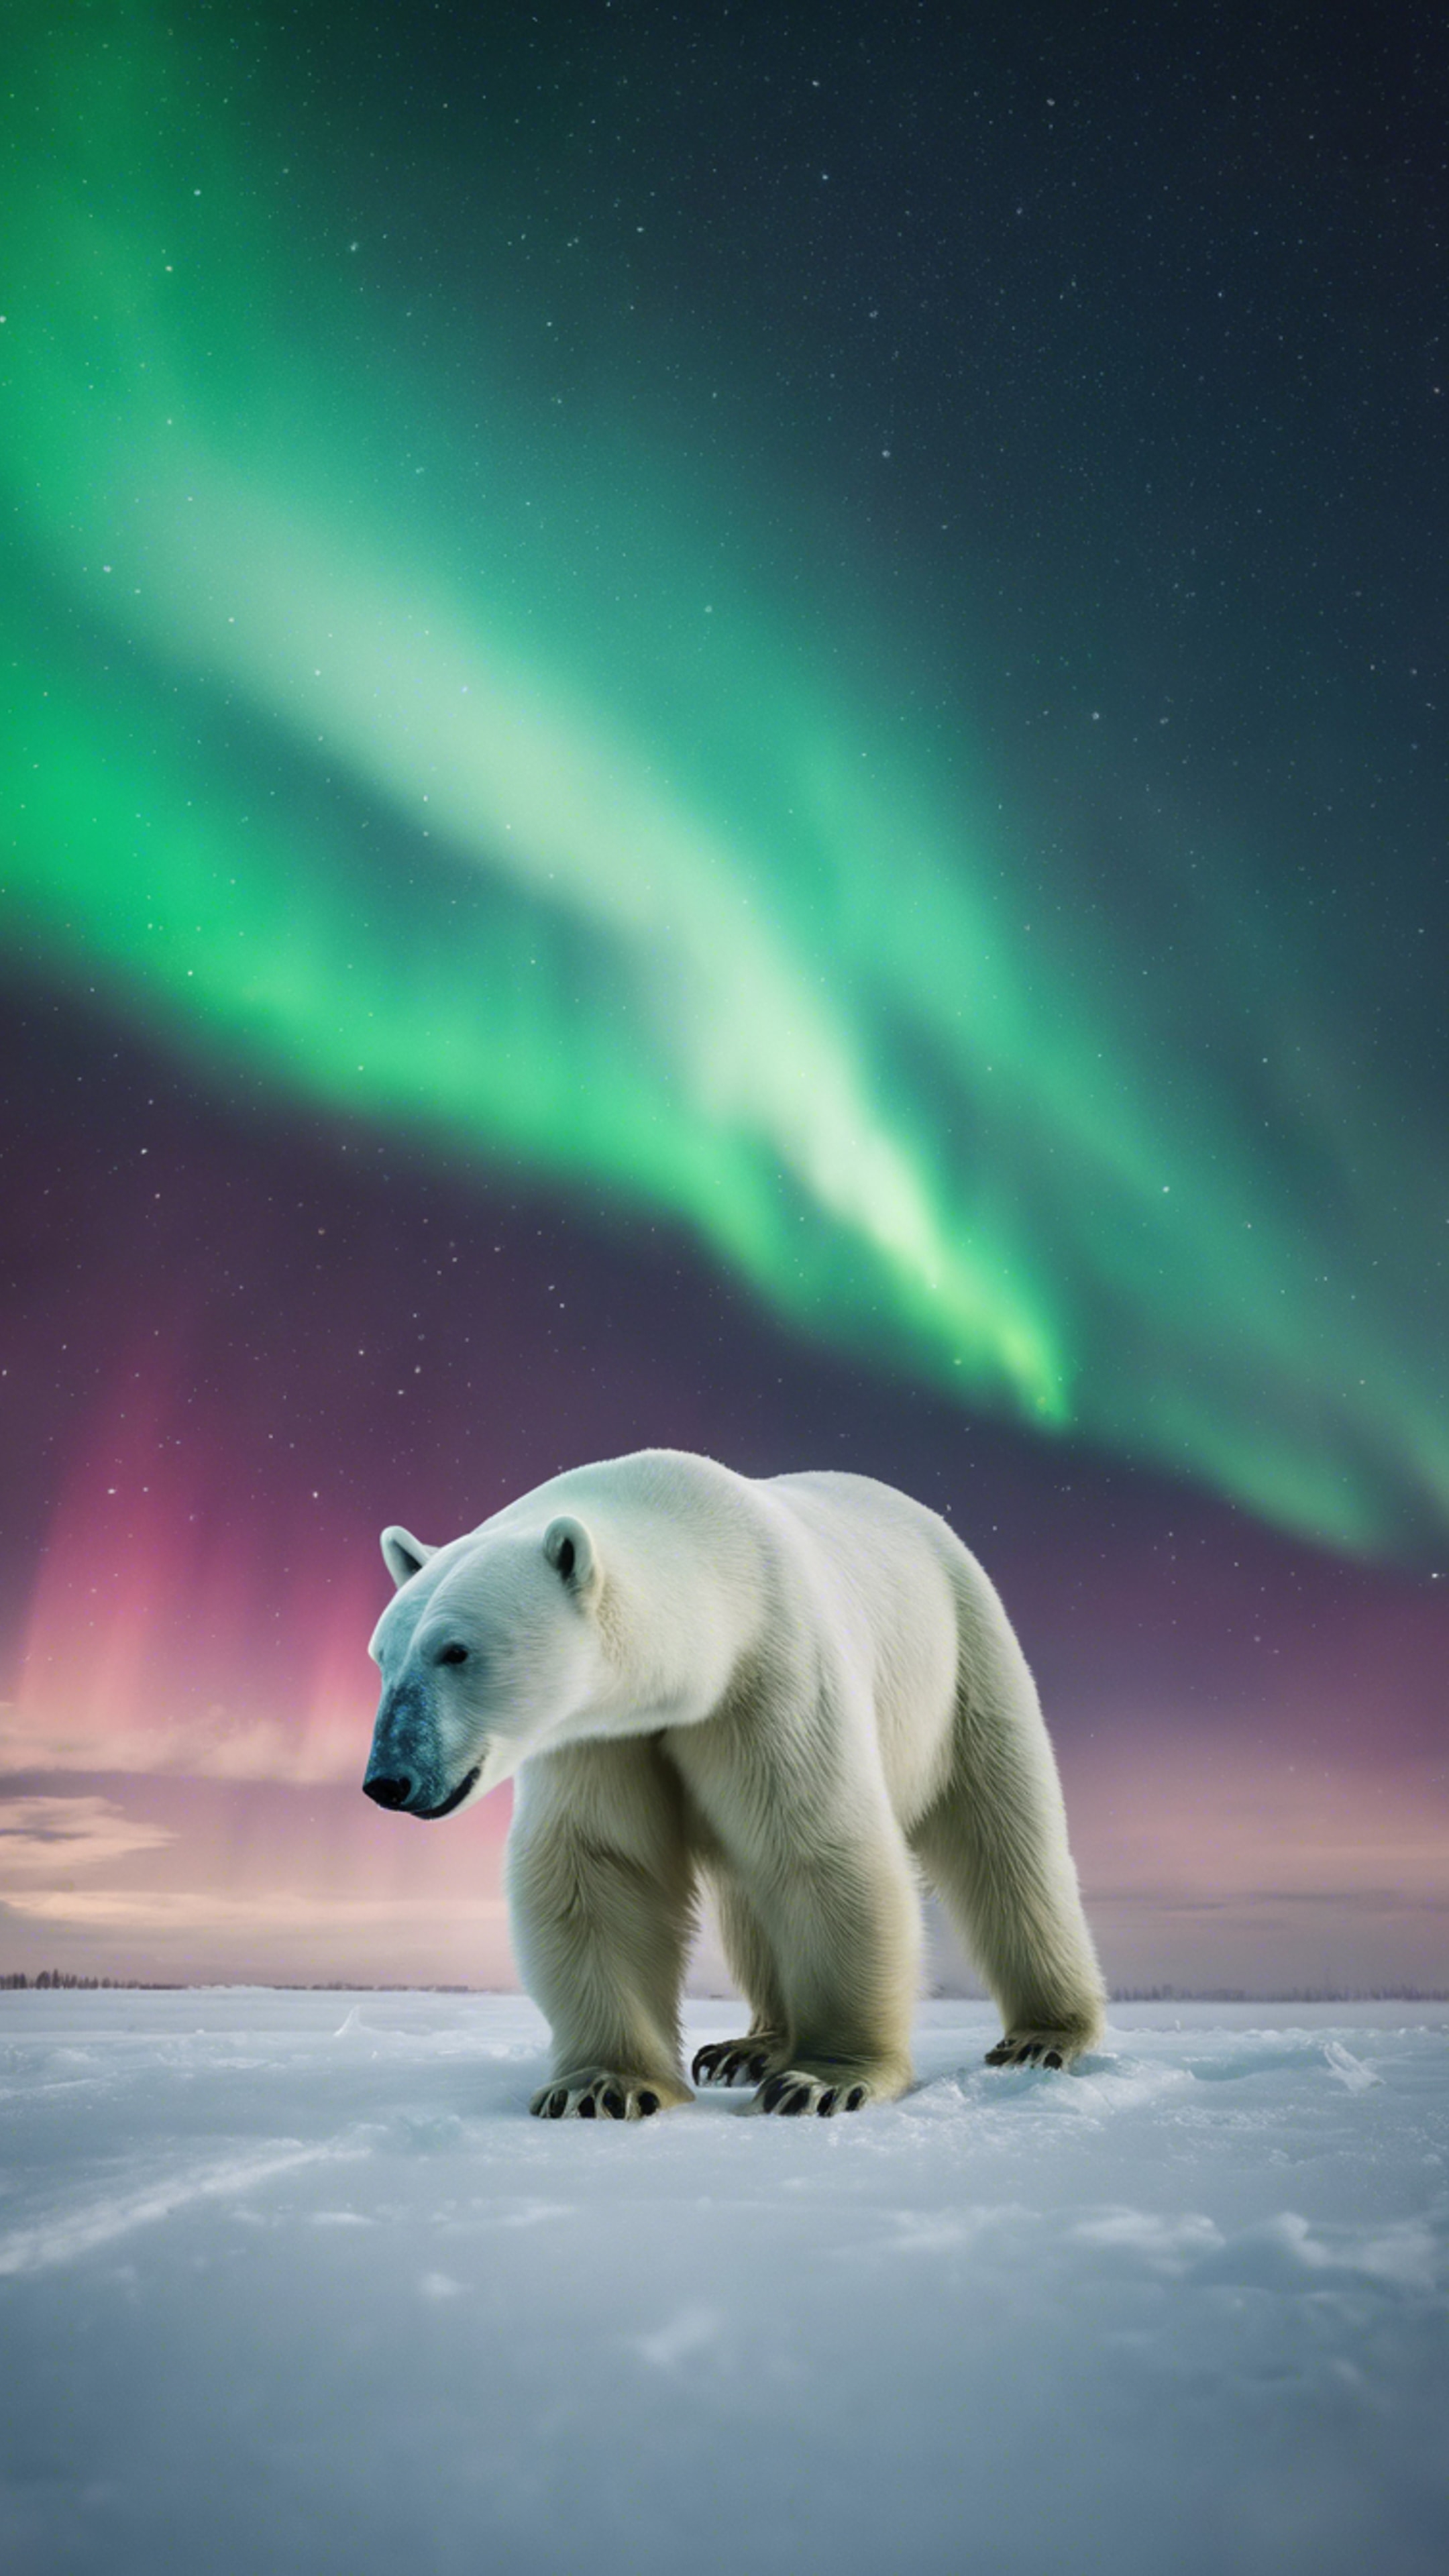 A lone polar bear venturing through the snow under the fascinating dance of the Northern Lights in the sky